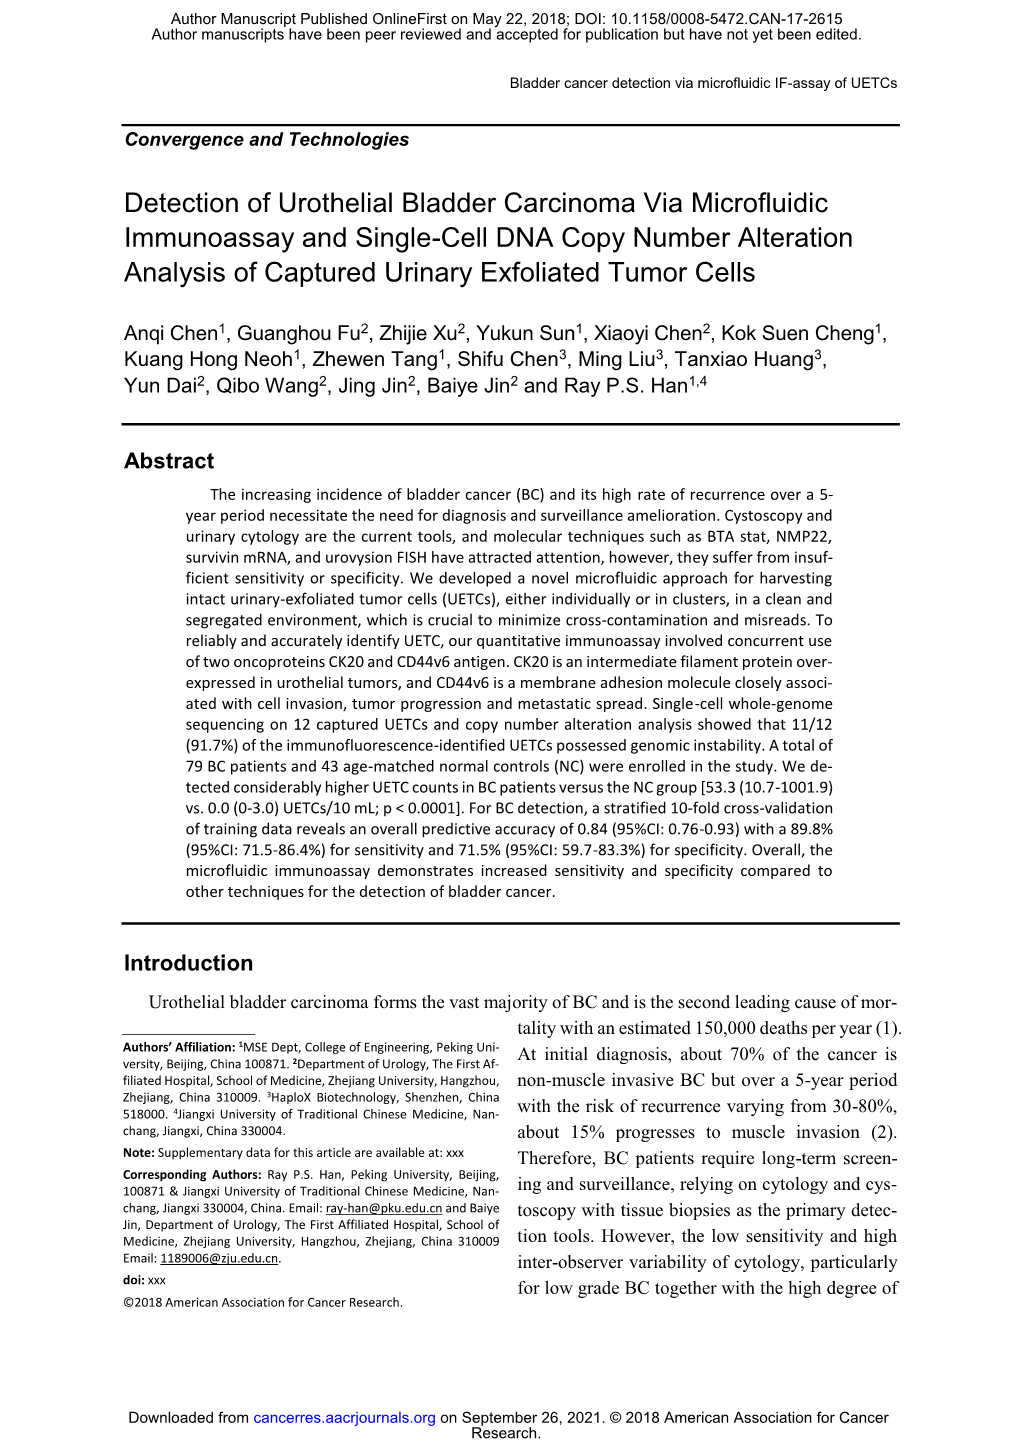 Detection of Bladder Cancer Via Microfluidic Immunoassay and Single-Cell DNA Copy Number Alteration Analysis of Captured Urinary Exfoliated Tumor Cells